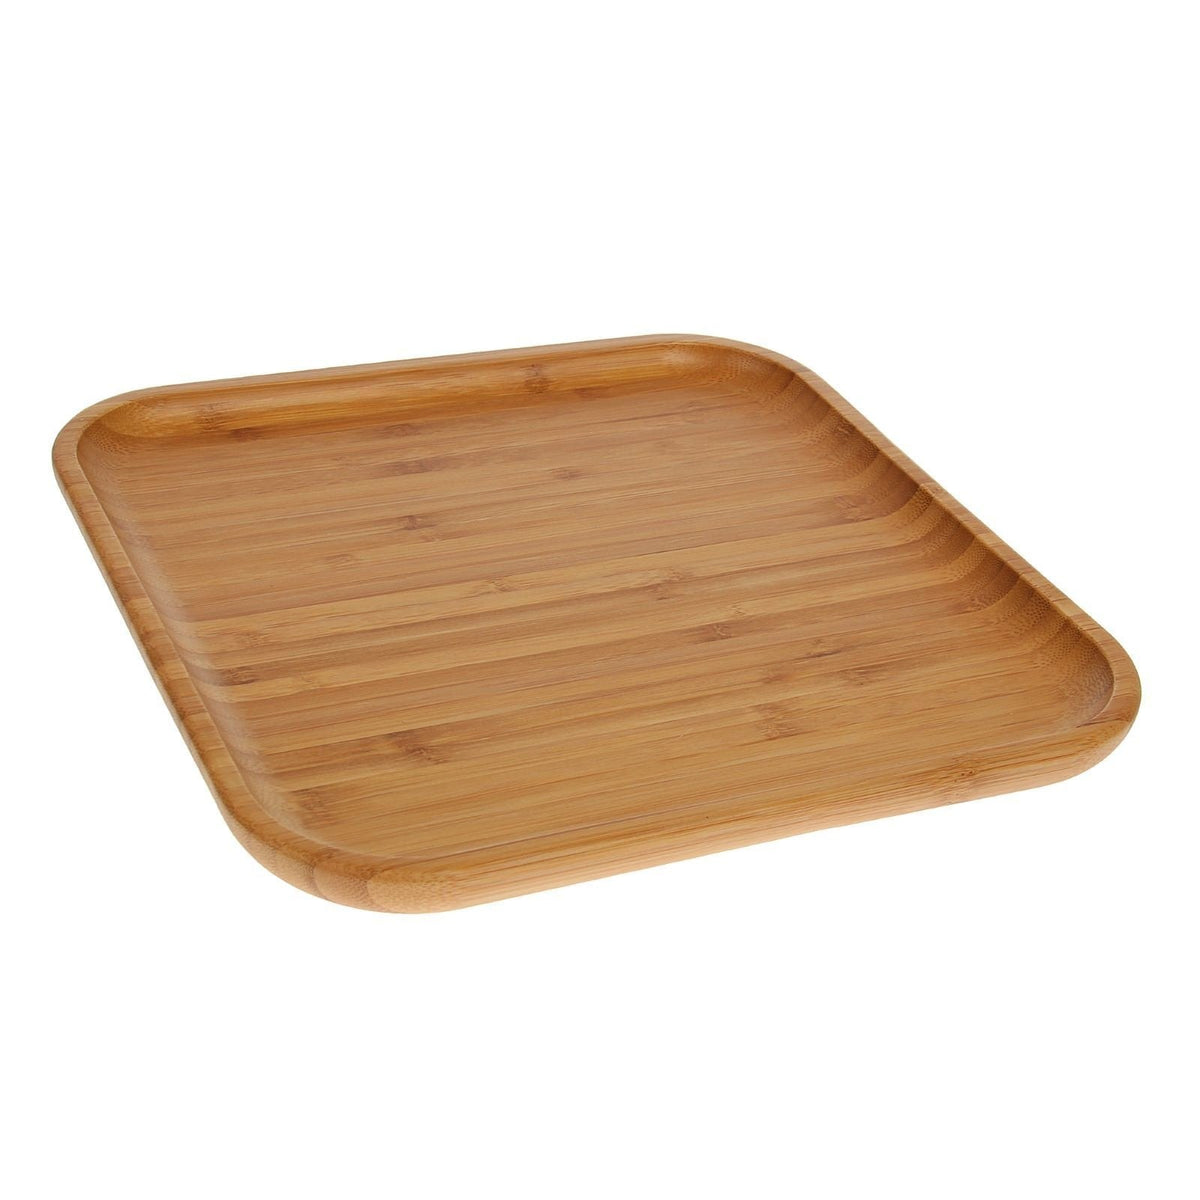 Wilmax Natural Bamboo Plate 11" X 11" | 28 Cm X 28 Cm SKU: WL-771024/A